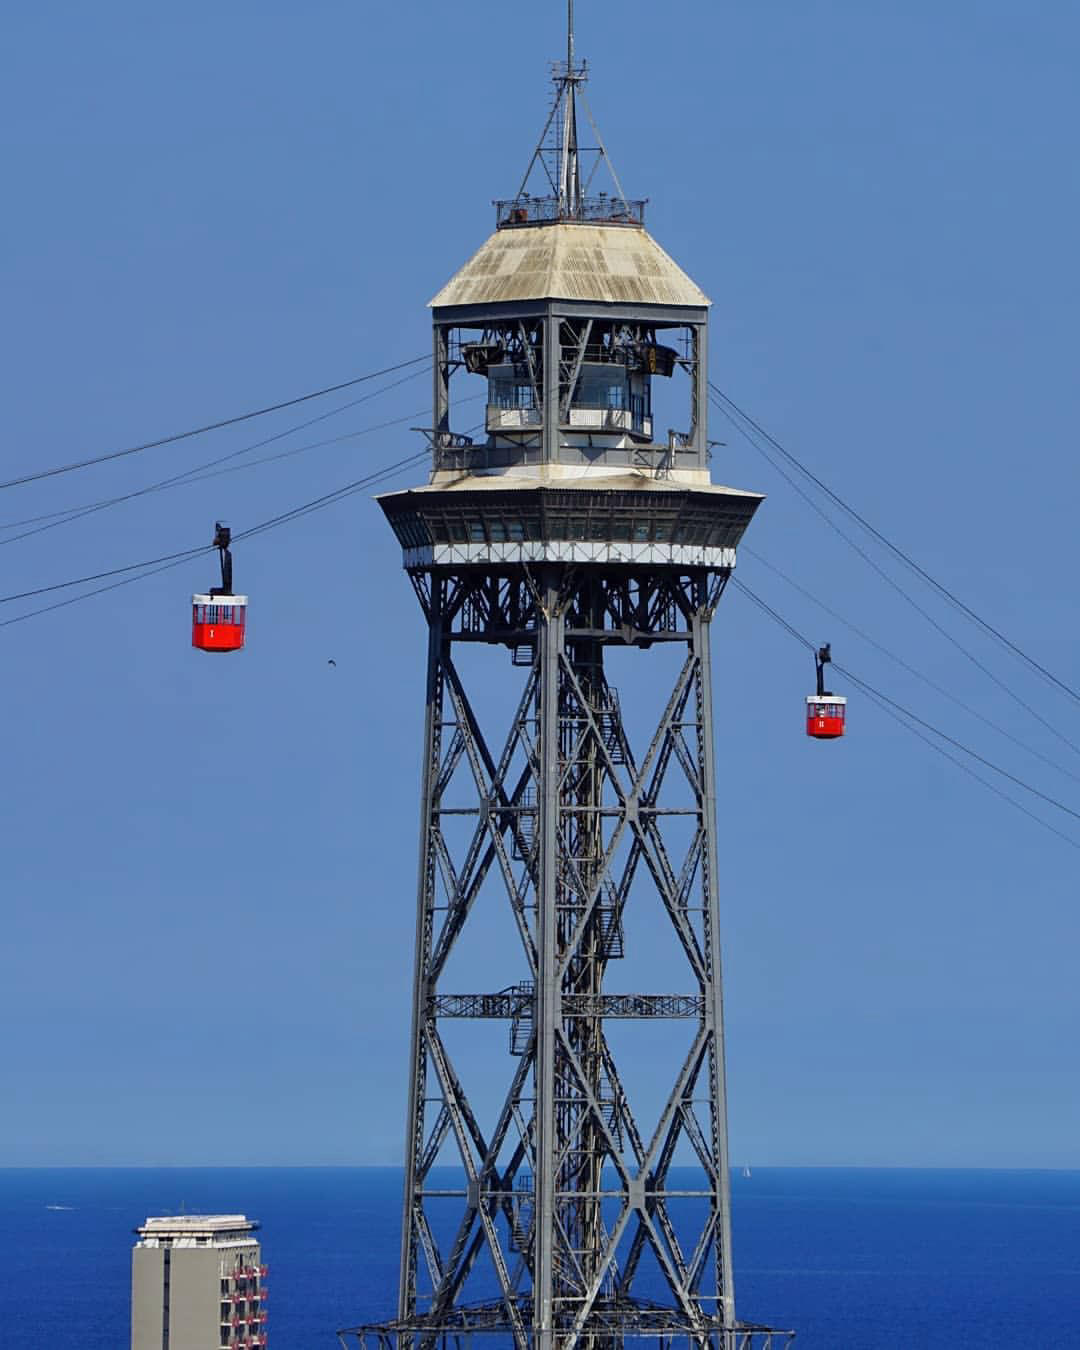 Barcelona - Iconic cable car ride from the beach to the castle of Montjuic